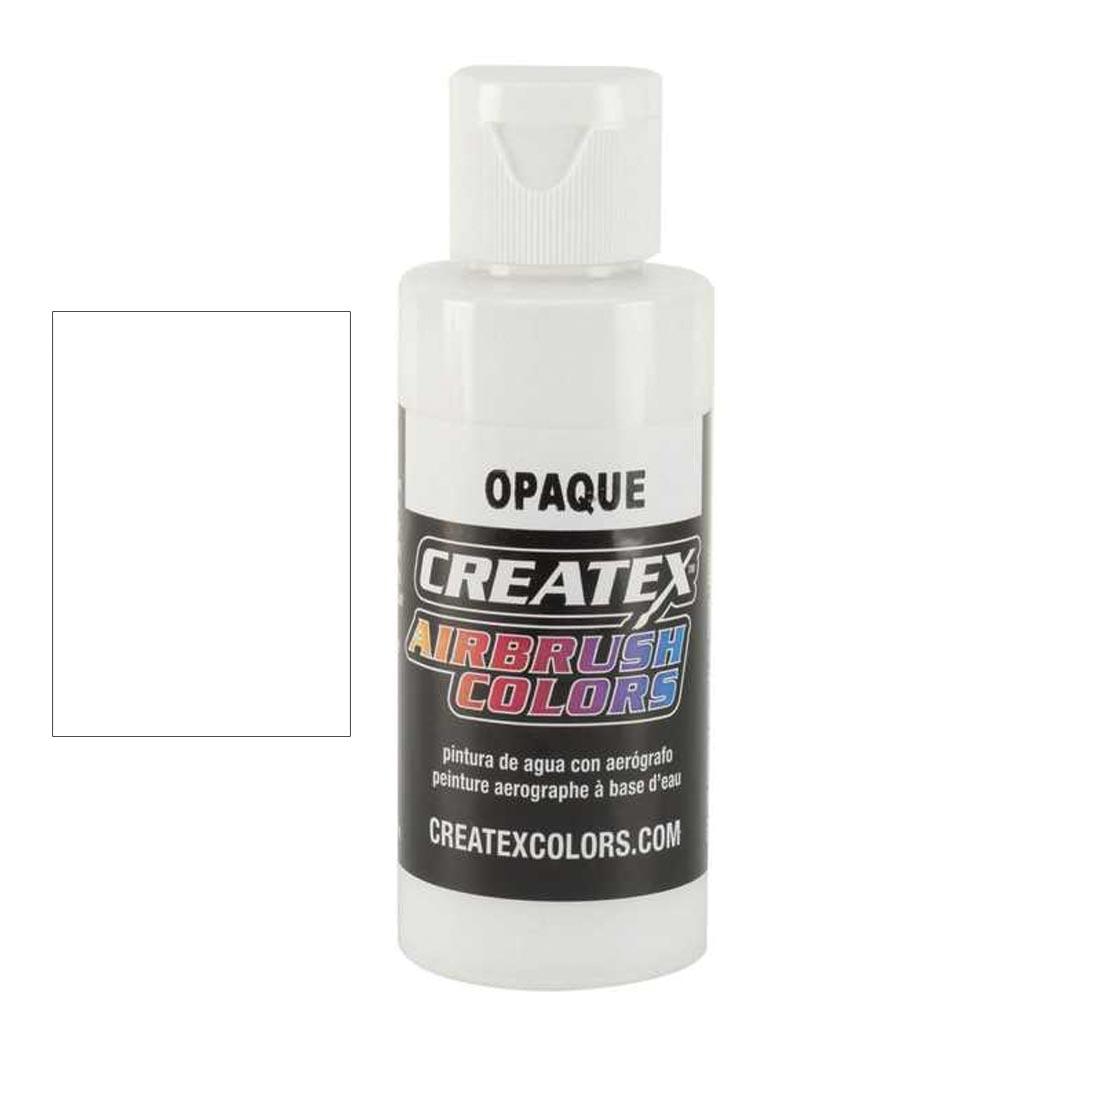 Bottle of Createx Airbrush Color Beside Opaque White Color Swatch